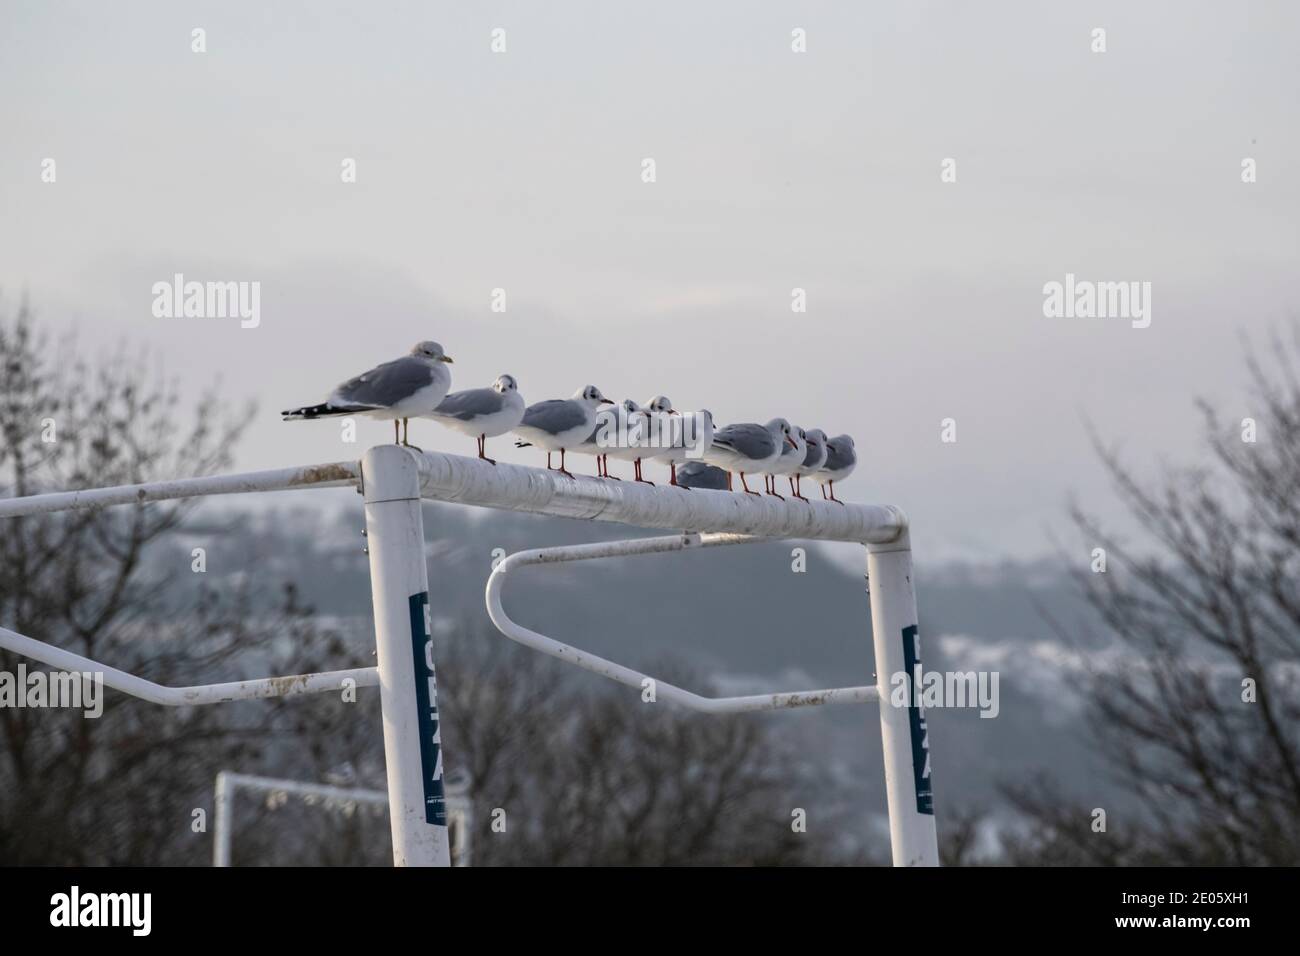 A regimented line of Black headed Gulls Chroicocephalus ridibundus on top of a football goalpost on a frosty winters day with snow on the ground Stock Photo